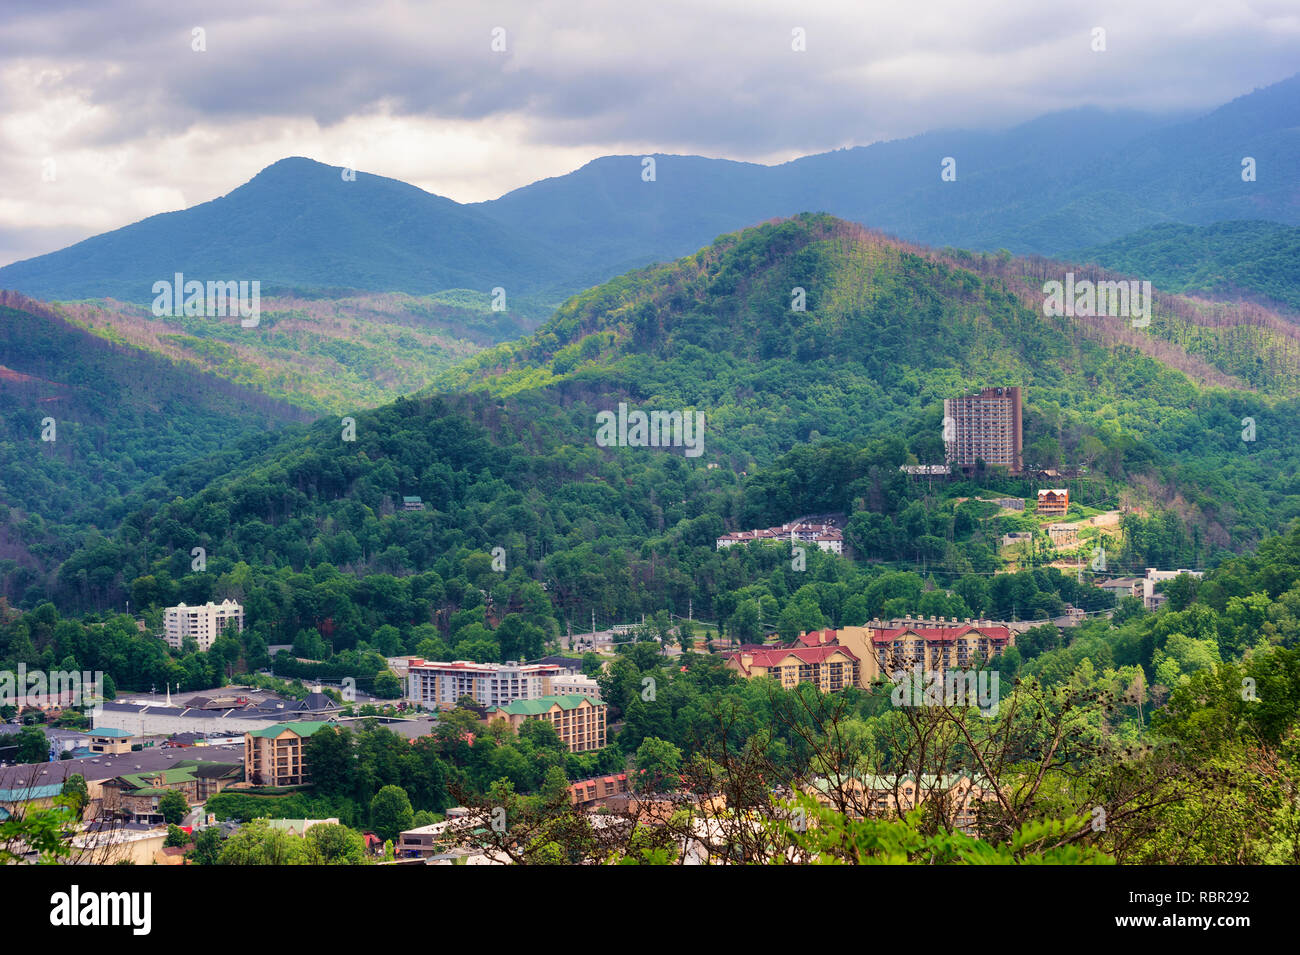 Gatlinburg Tennessee is well known at a gateway to the Great Smoky Mountain National Park. Stock Photo